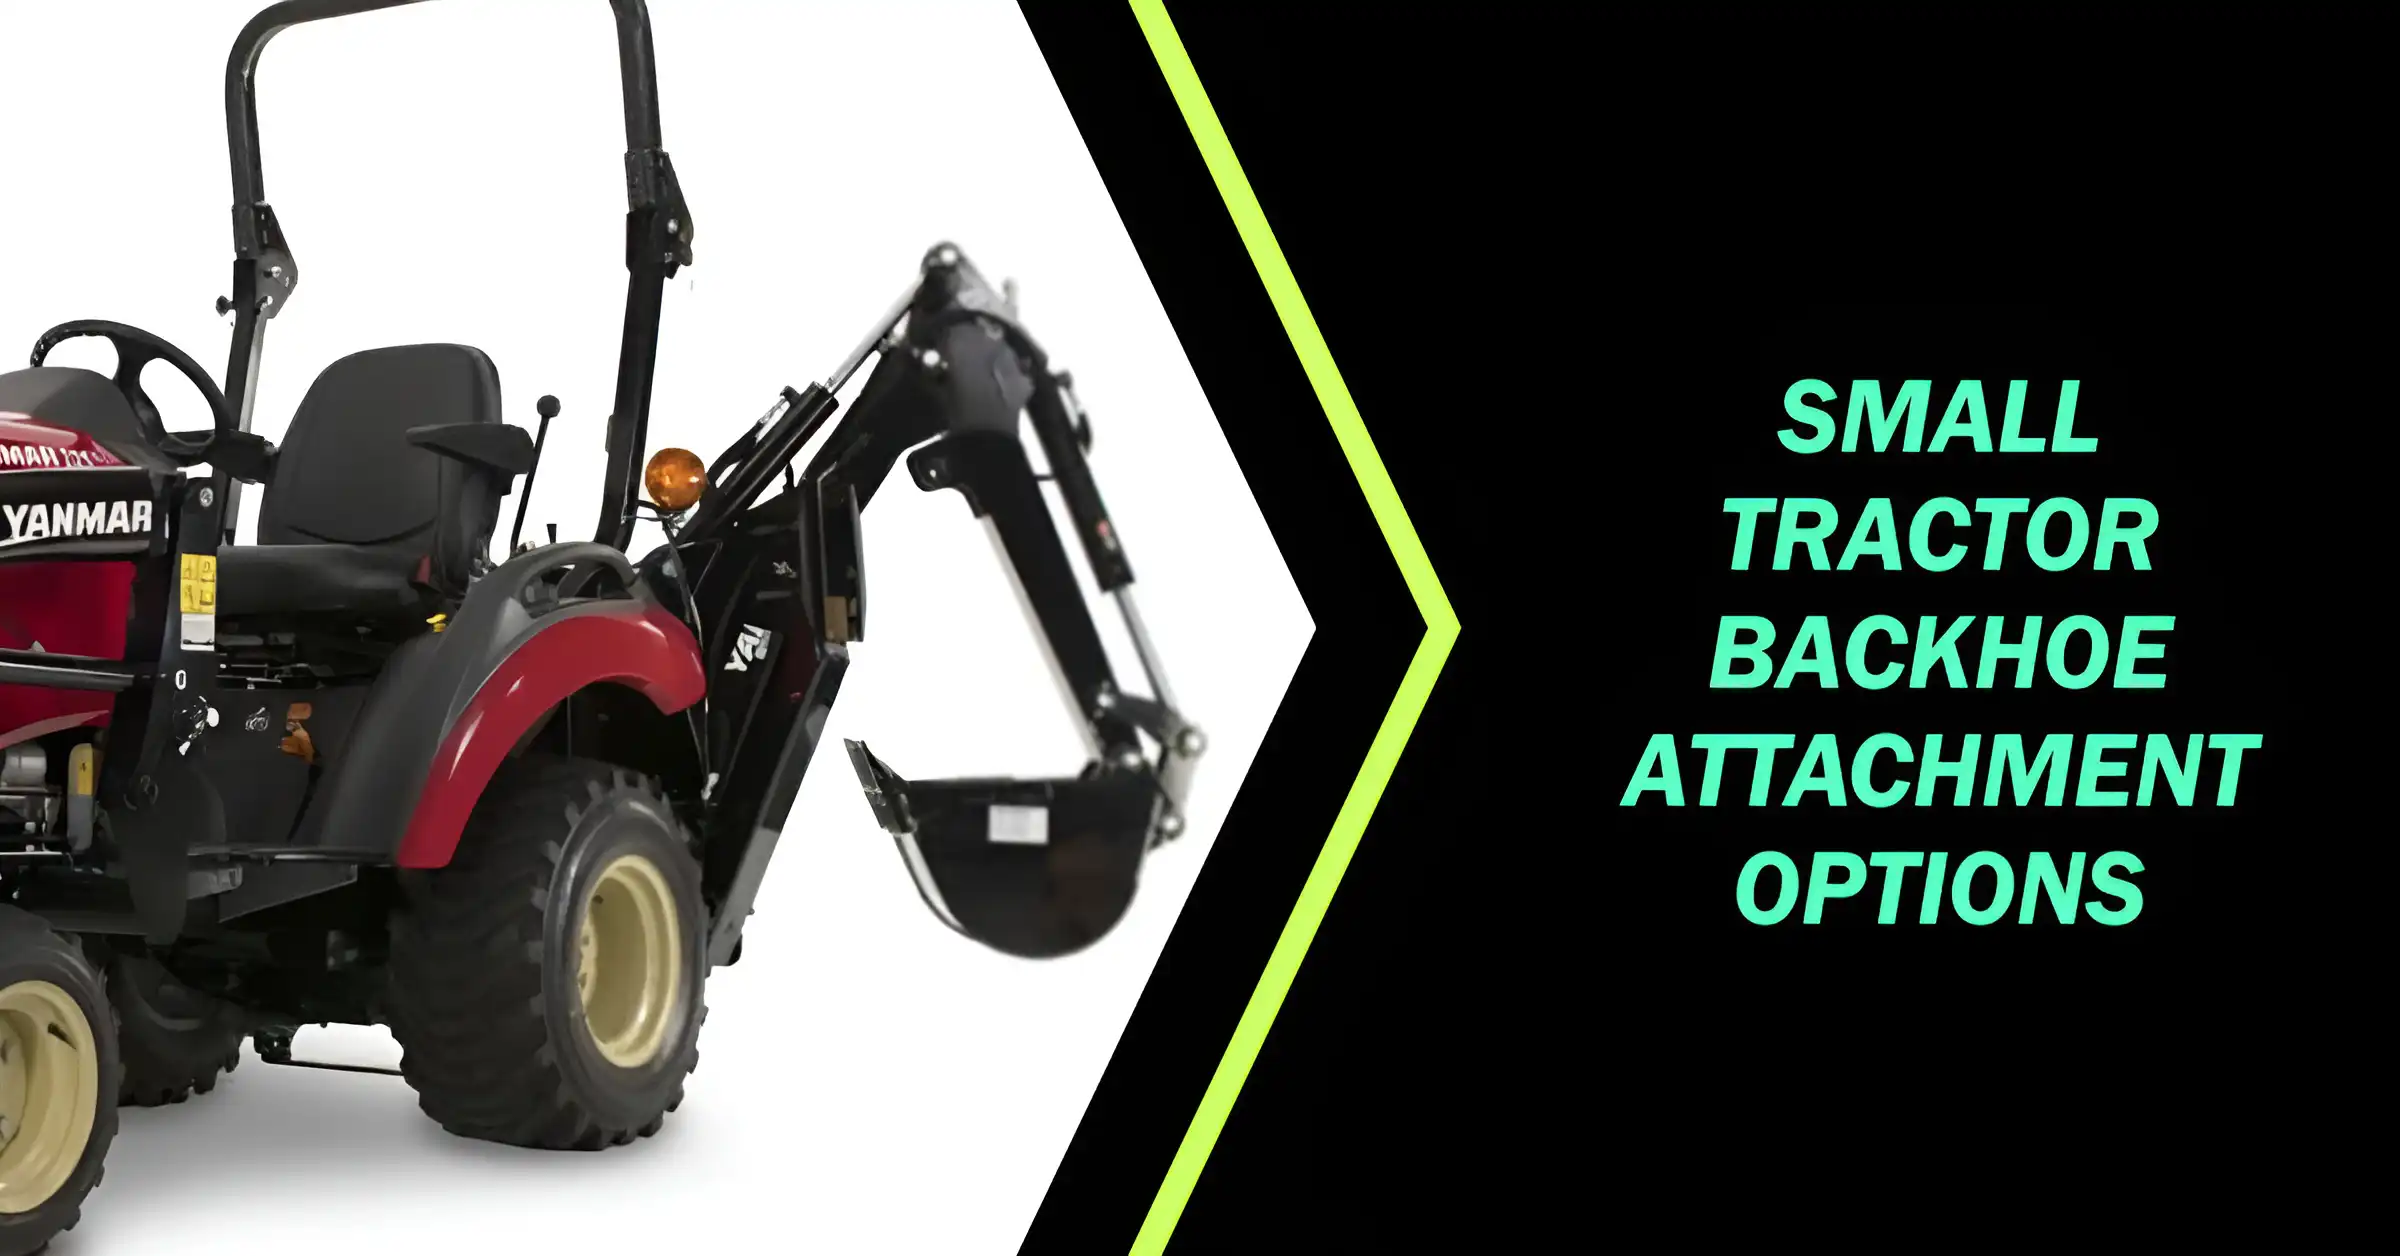 Small Tractor Backhoe Attachment Options